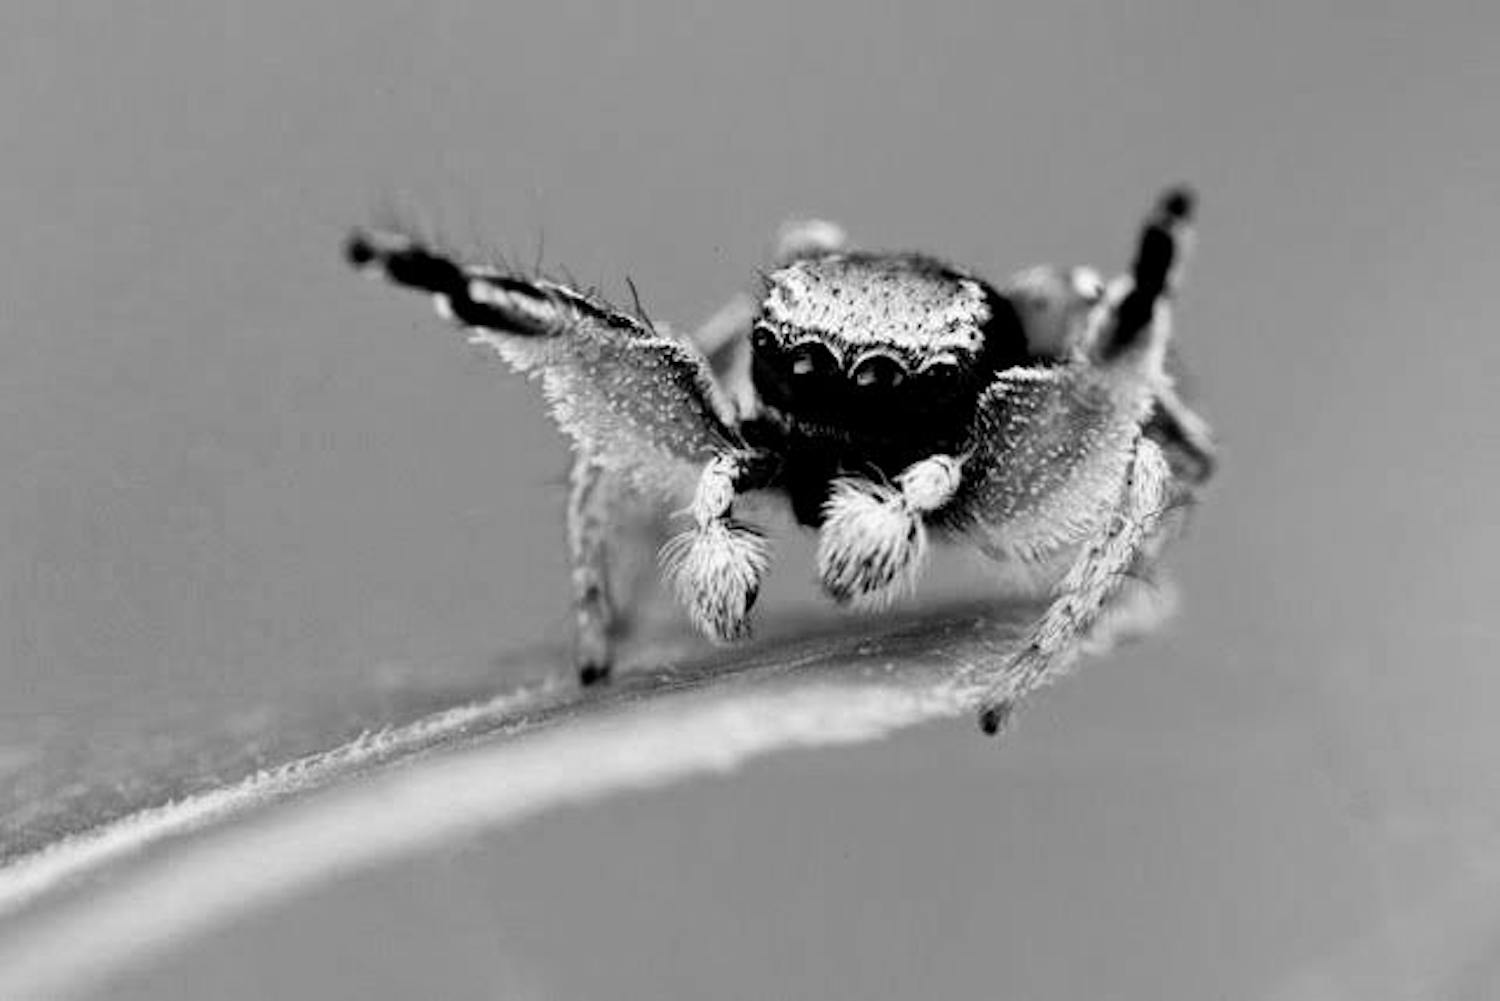 A micro-CT image of a scanned jumping spider, called Anasaitis canosa.&nbsp;
&nbsp;